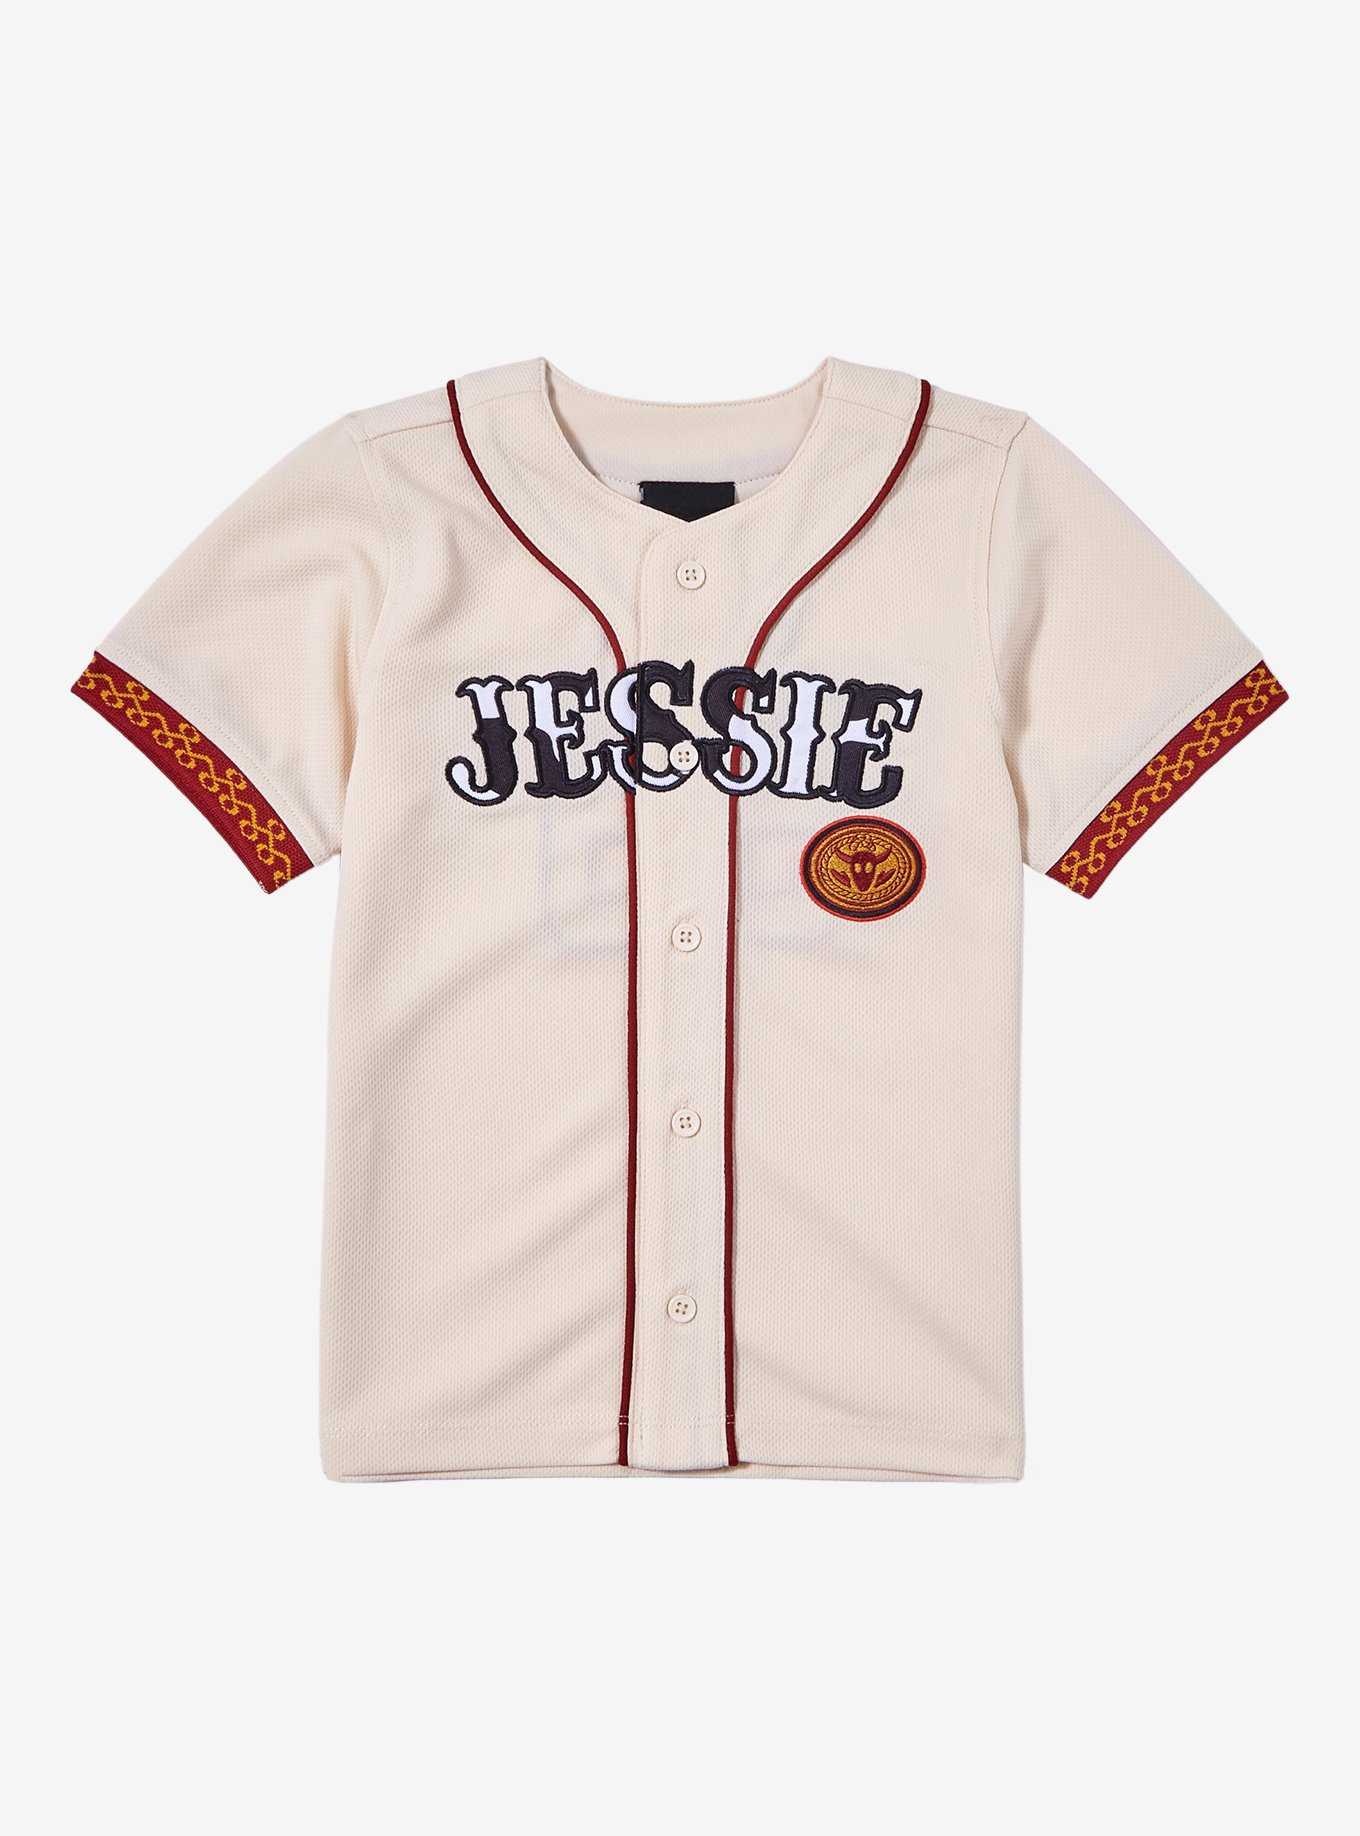 Disney Pixar Toy Story Jessie Toddler Baseball Jersey — BoxLunch Exclusive, , hi-res